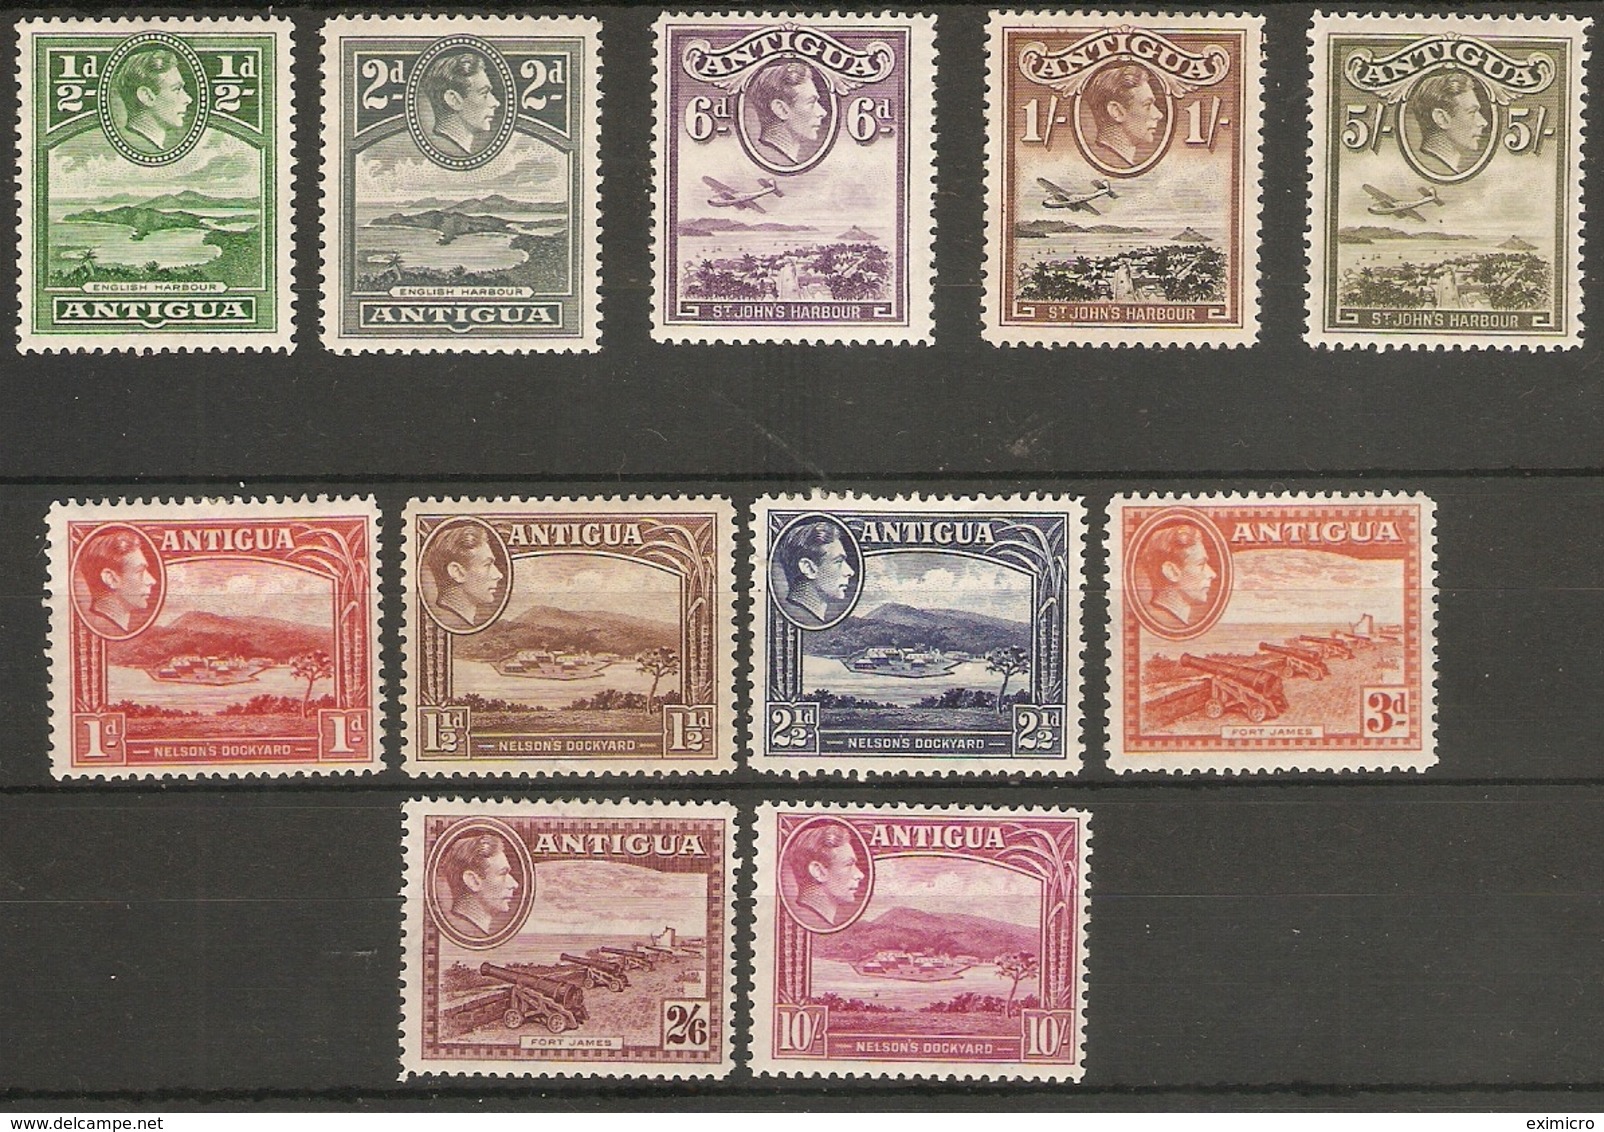 ANTIGUA 1938 - 1951 SET TO 10s SG 98/108 MOUNTED MINT - HIGH CATALOGUE VALUE - - 1858-1960 Crown Colony